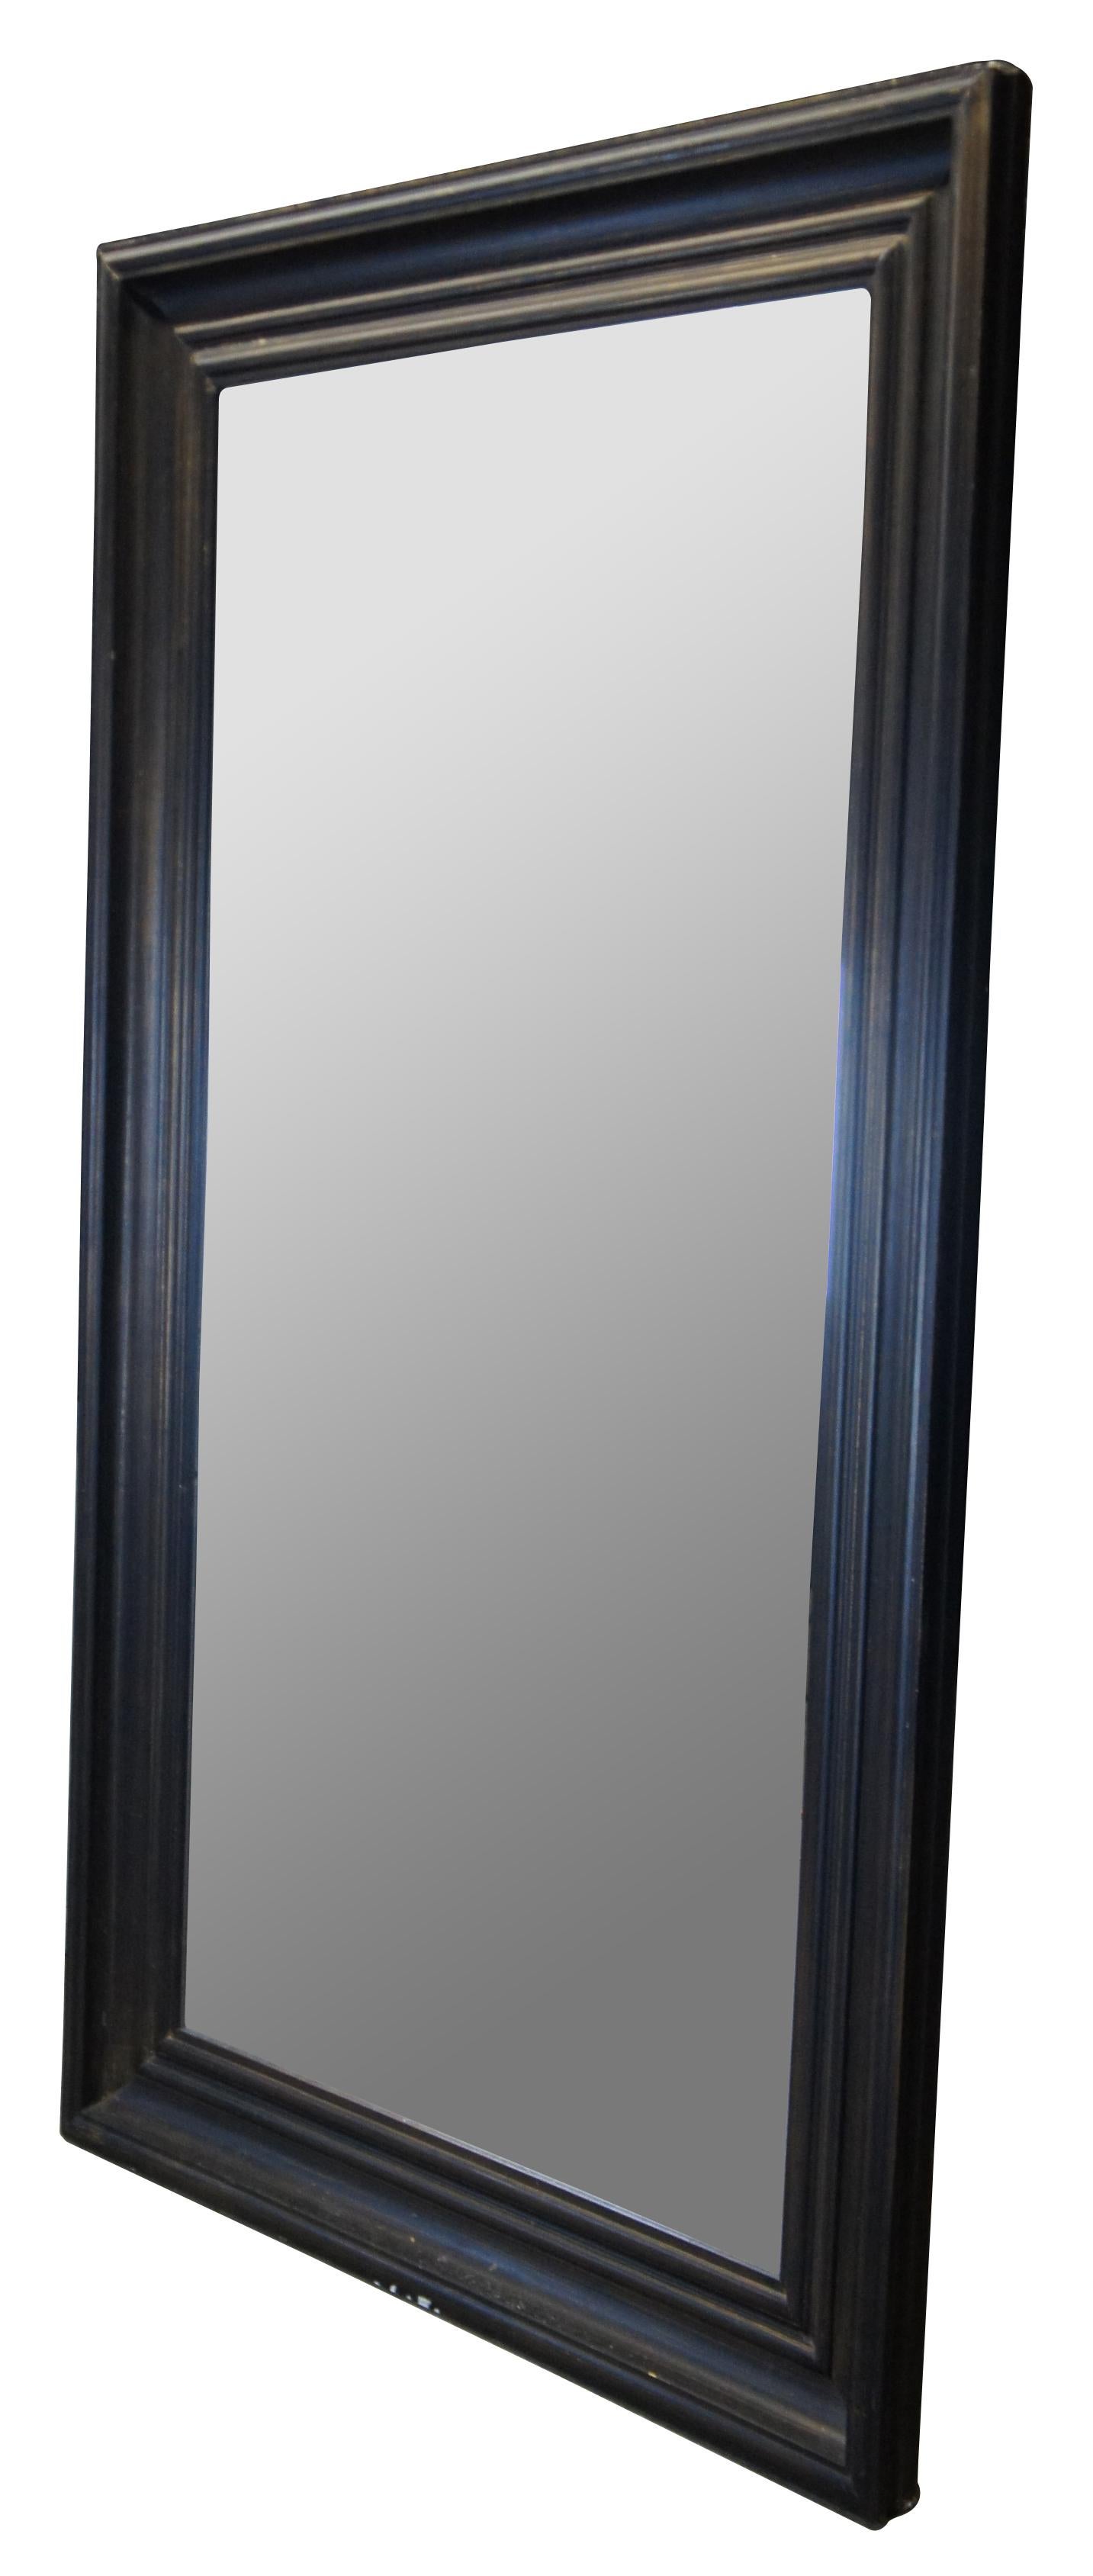 Oversized modern wall mirror. Great for use in freestanding setting, or over a mantel/ along a wall. Black over gold rubbed finish with beveled glass. Measures: 48